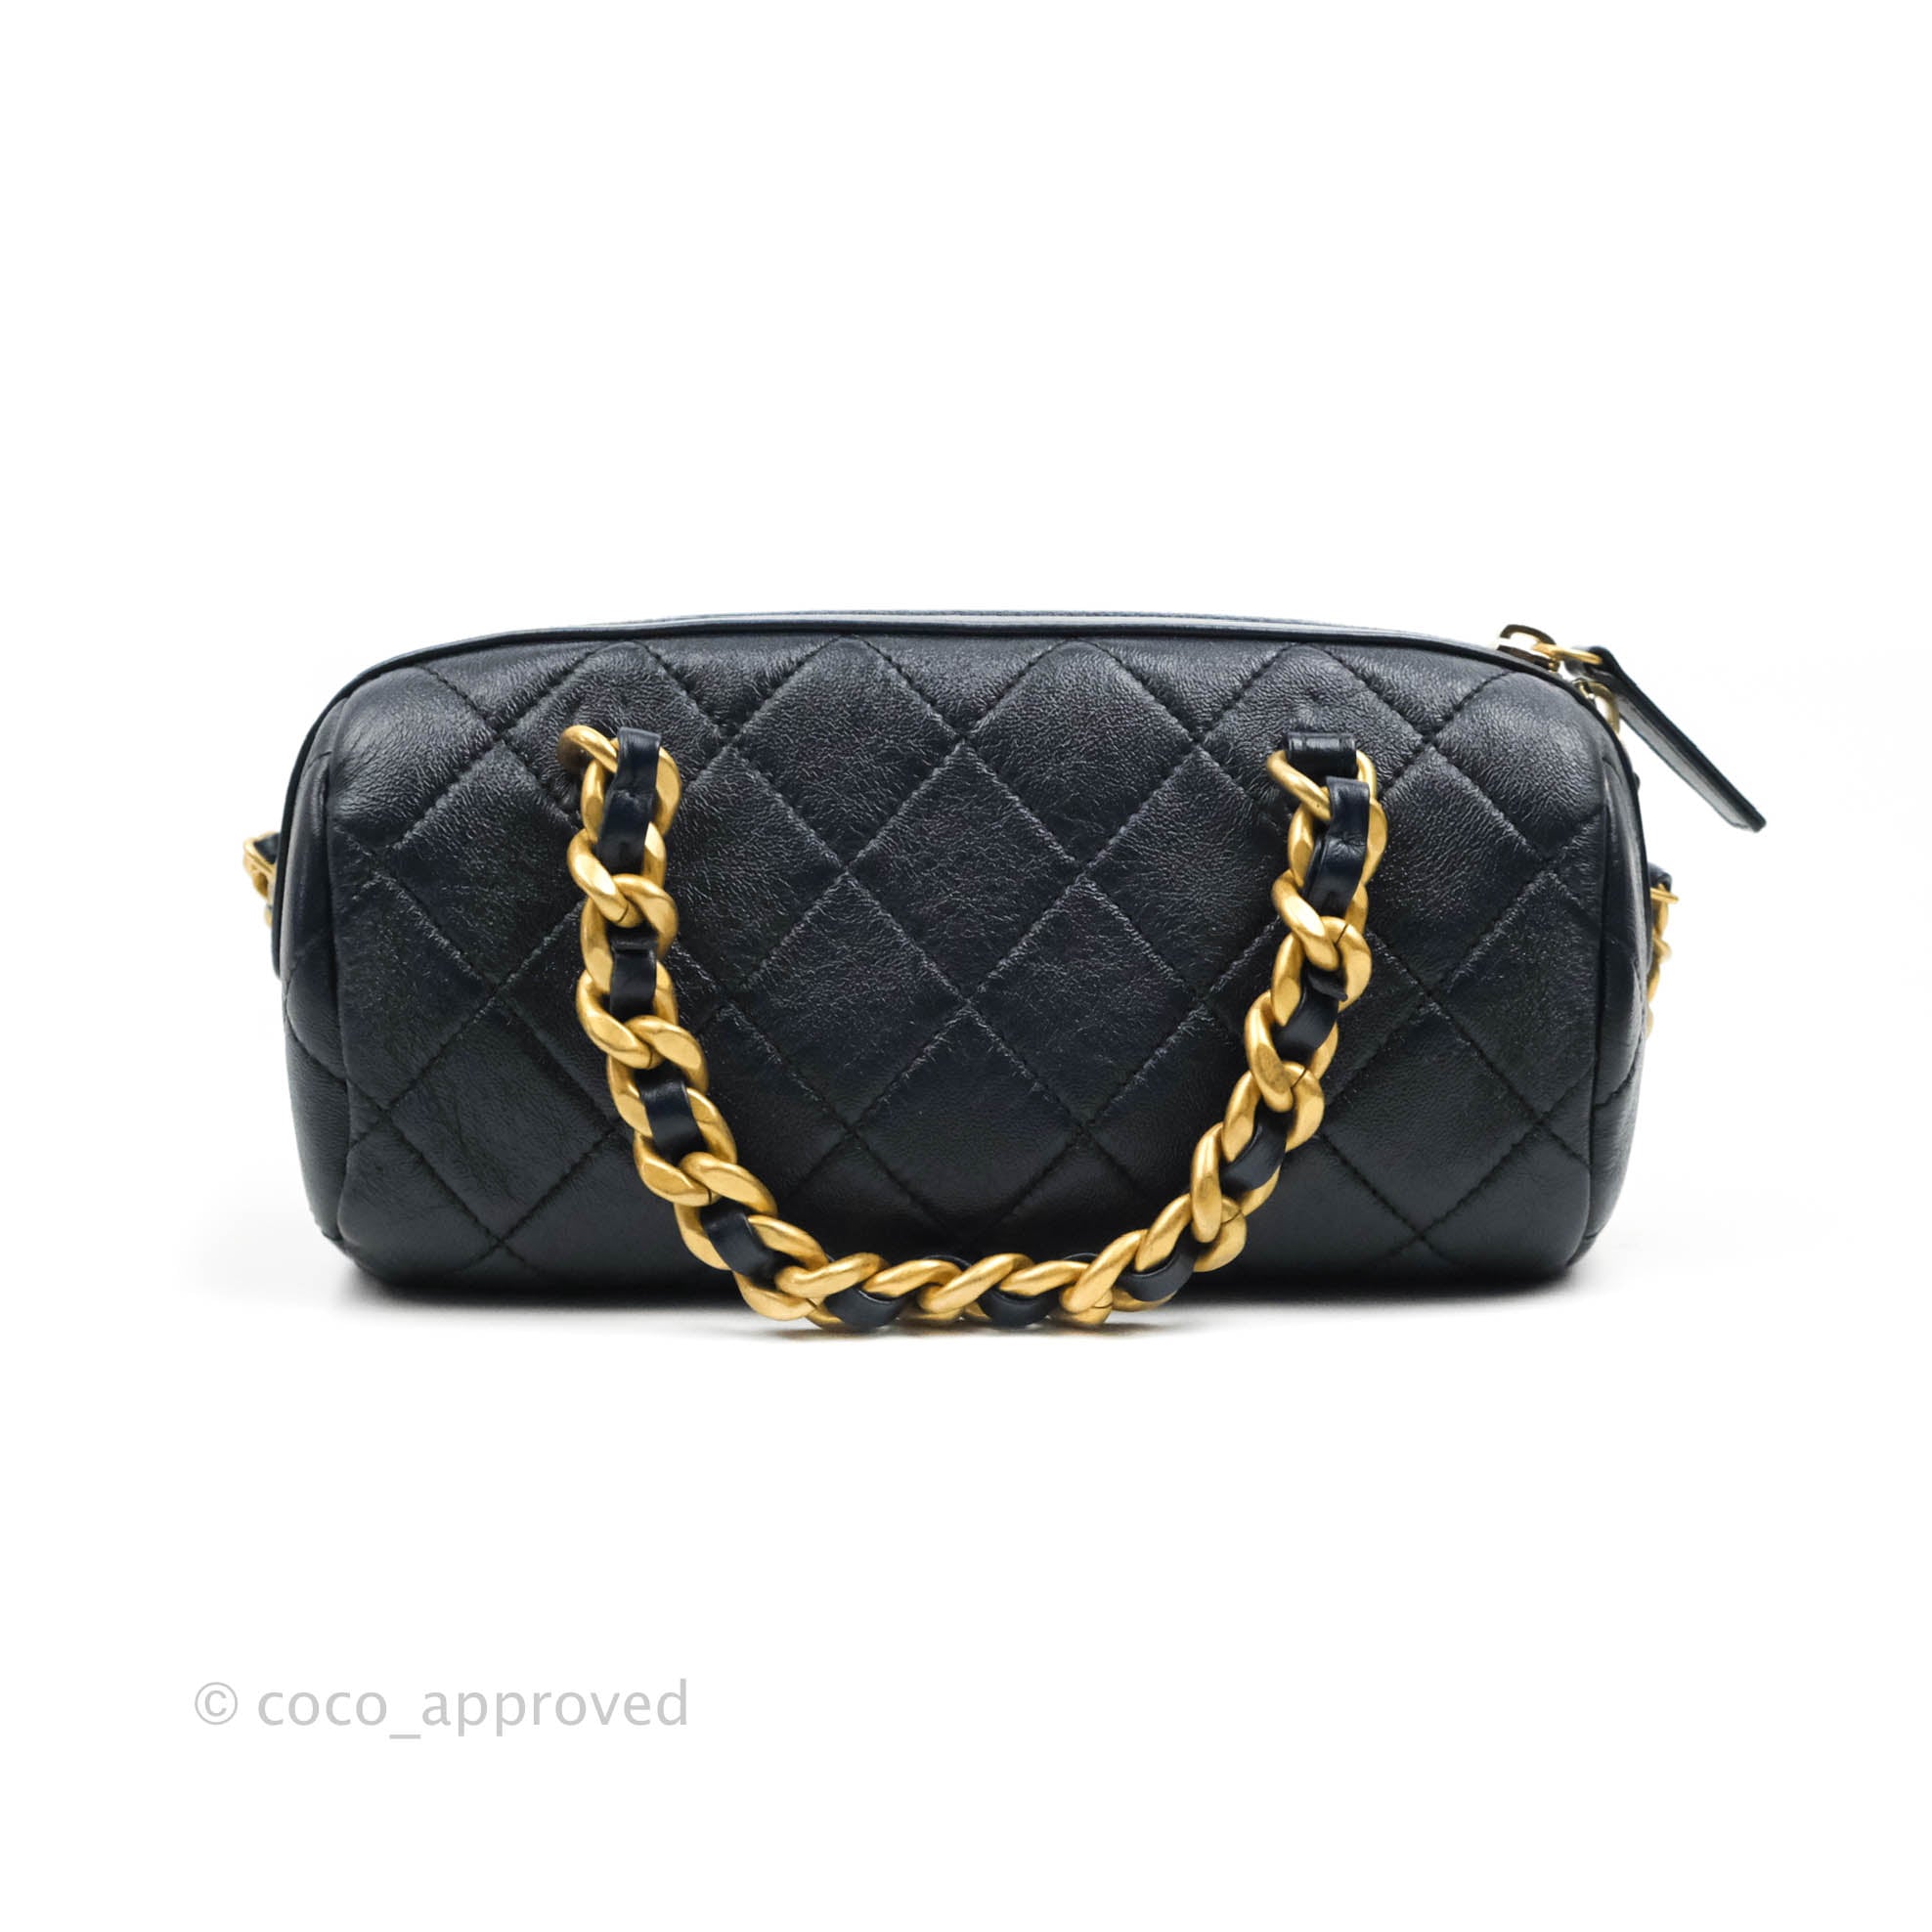 Chanel Black Quilted Calfskin Mini Fashion Therapy Bag Gold Hardware, 2020 (Very Good)